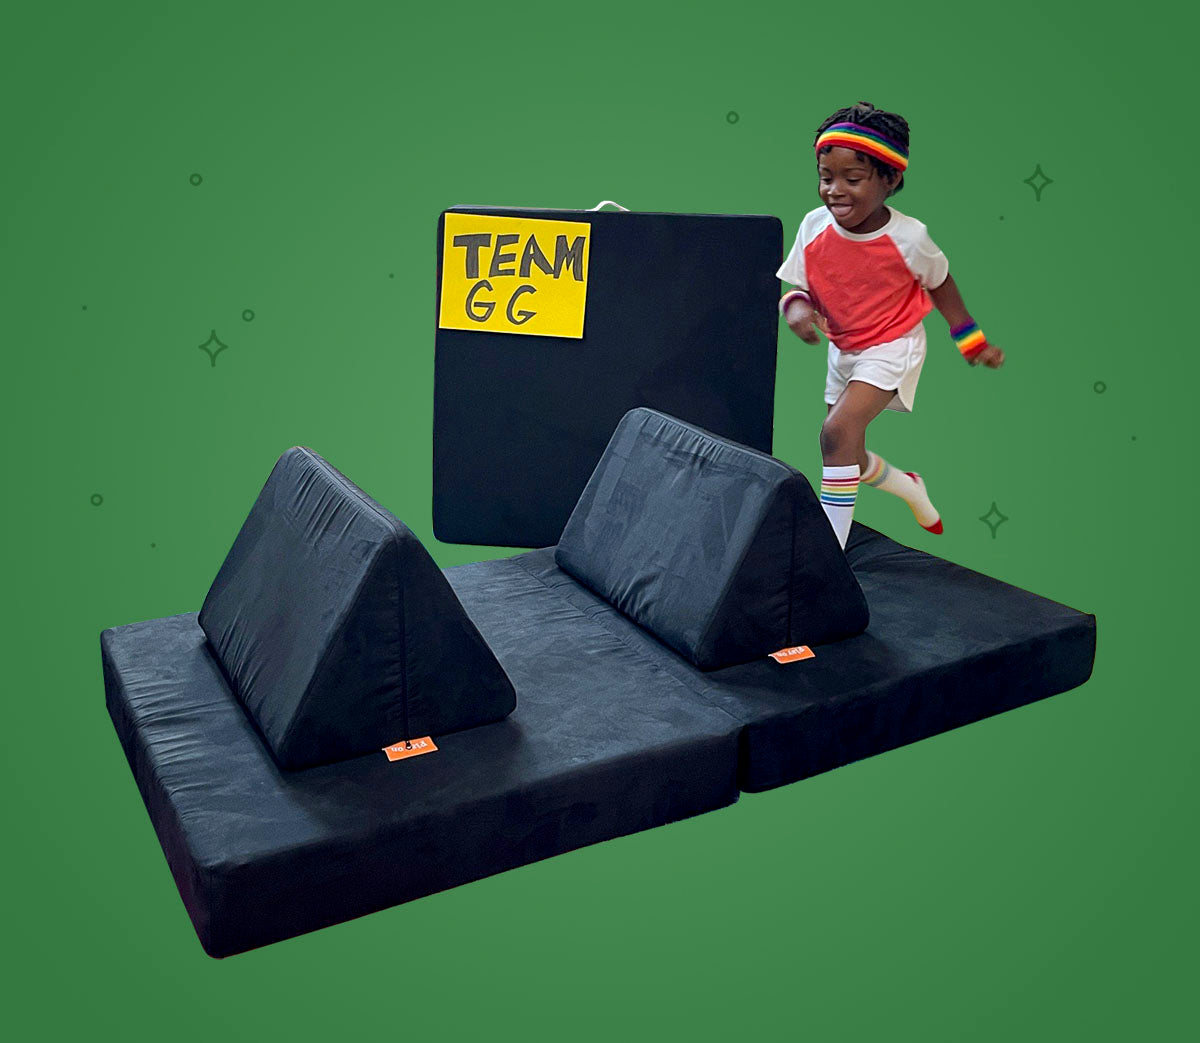 Child leaping over a pillow placed on cushion, set up like a hurdle from track and field